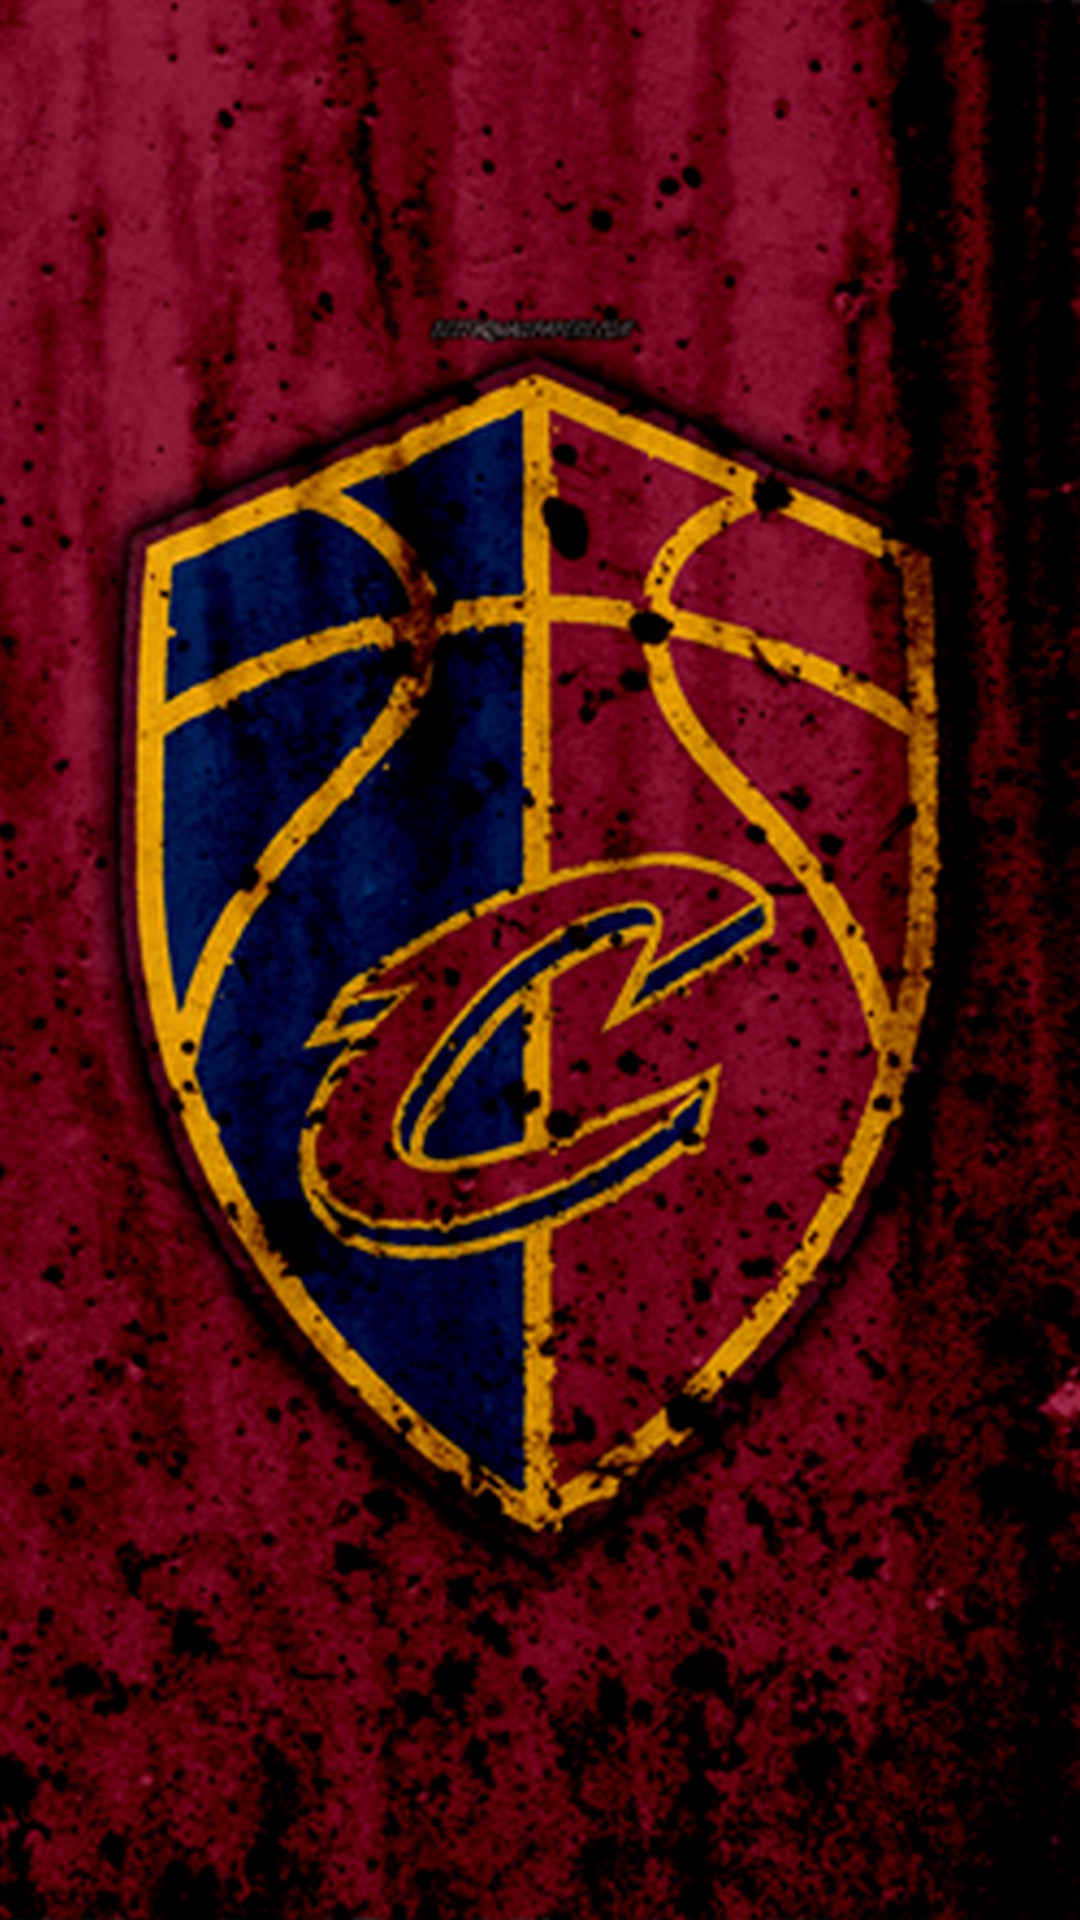 Cleveland Cavaliers HD Wallpaper For iPhone 1080x1920